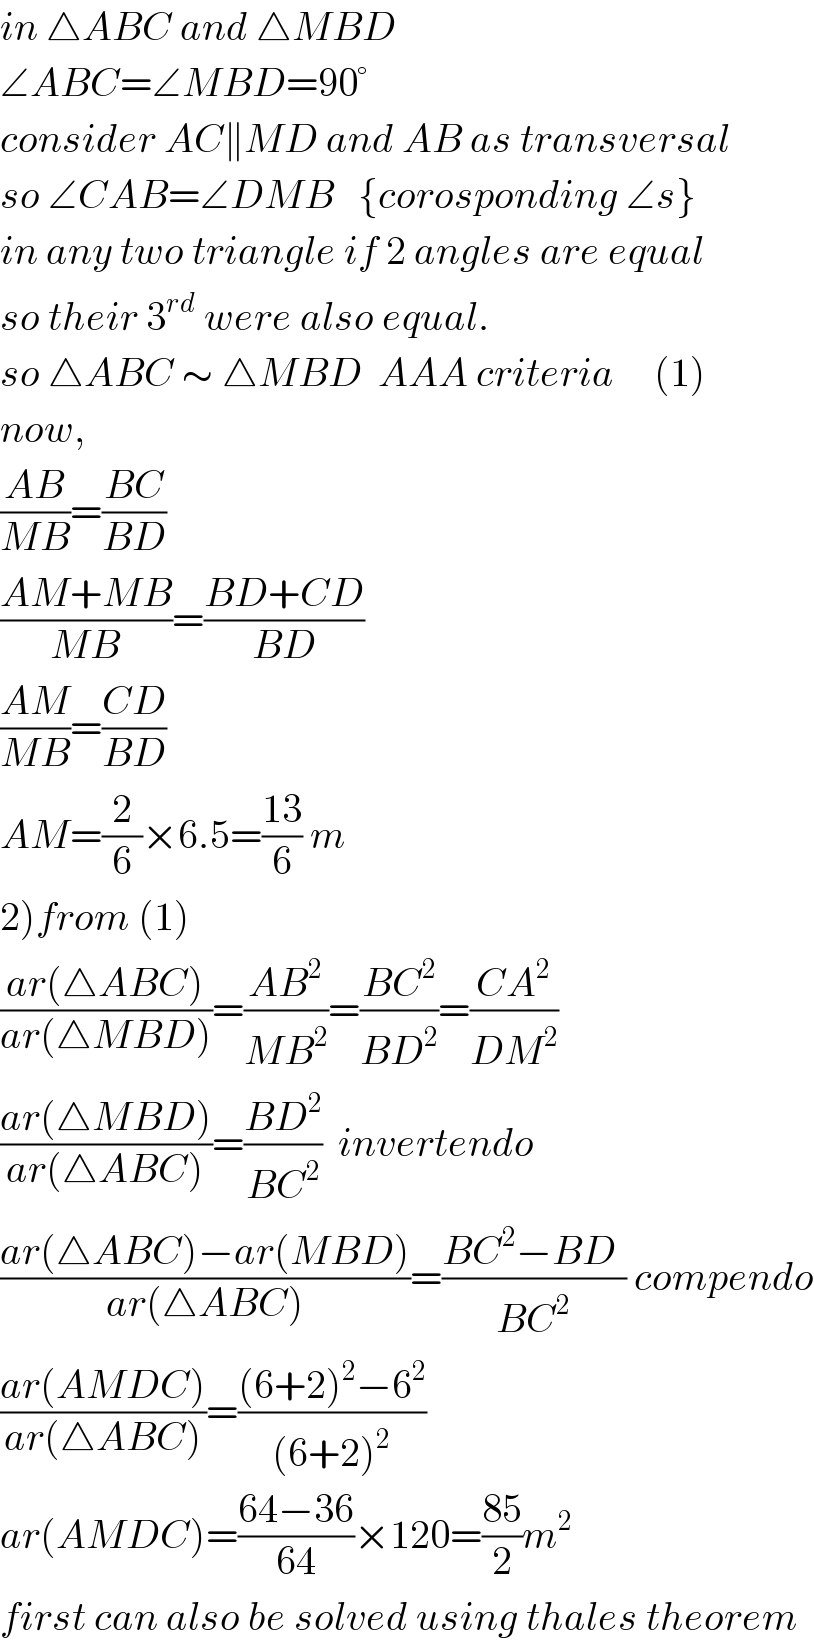 in △ABC and △MBD  ∠ABC=∠MBD=90°  consider AC∥MD and AB as transversal  so ∠CAB=∠DMB   {corosponding ∠s}  in any two triangle if 2 angles are equal  so their 3^(rd)  were also equal.  so △ABC ∼ △MBD  AAA criteria     (1)  now,  ((AB)/(MB))=((BC)/(BD))  ((AM+MB)/(MB))=((BD+CD)/(BD))  ((AM)/(MB))=((CD)/(BD))  AM=(2/6)×6.5=((13)/6) m  2)from (1)  ((ar(△ABC))/(ar(△MBD)))=((AB^2 )/(MB^2 ))=((BC^2 )/(BD^2 ))=((CA^2 )/(DM^2 ))  ((ar(△MBD))/(ar(△ABC)))=((BD^2 )/(BC^2 ))  invertendo  ((ar(△ABC)−ar(MBD))/(ar(△ABC)))=((BC^2 −BD^ )/(BC^2 )) compendo  ((ar(AMDC))/(ar(△ABC)))=(((6+2)^2 −6^2 )/((6+2)^2 ))  ar(AMDC)=((64−36)/(64))×120=((85)/2)m^2   first can also be solved using thales theorem  